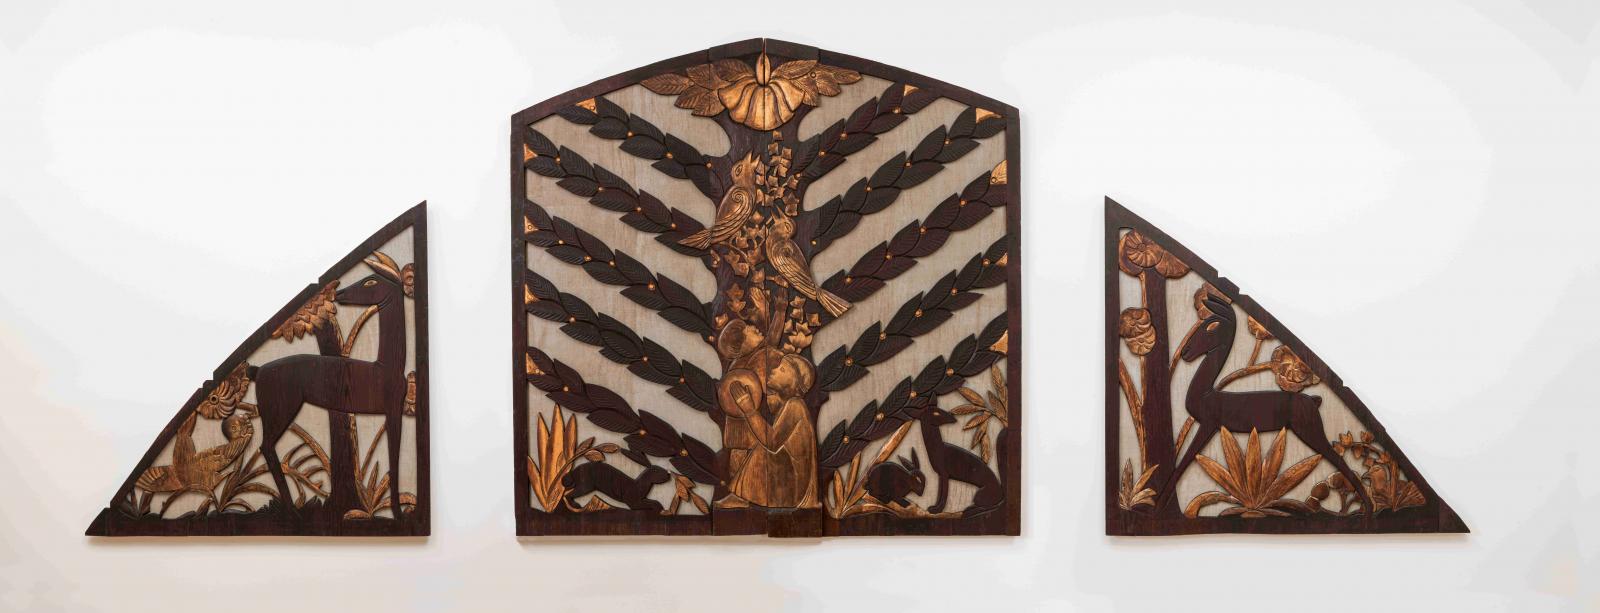 Three panels depict a woodland scene. The panels include humans, animals, and plants. The panels are wood and gold. 